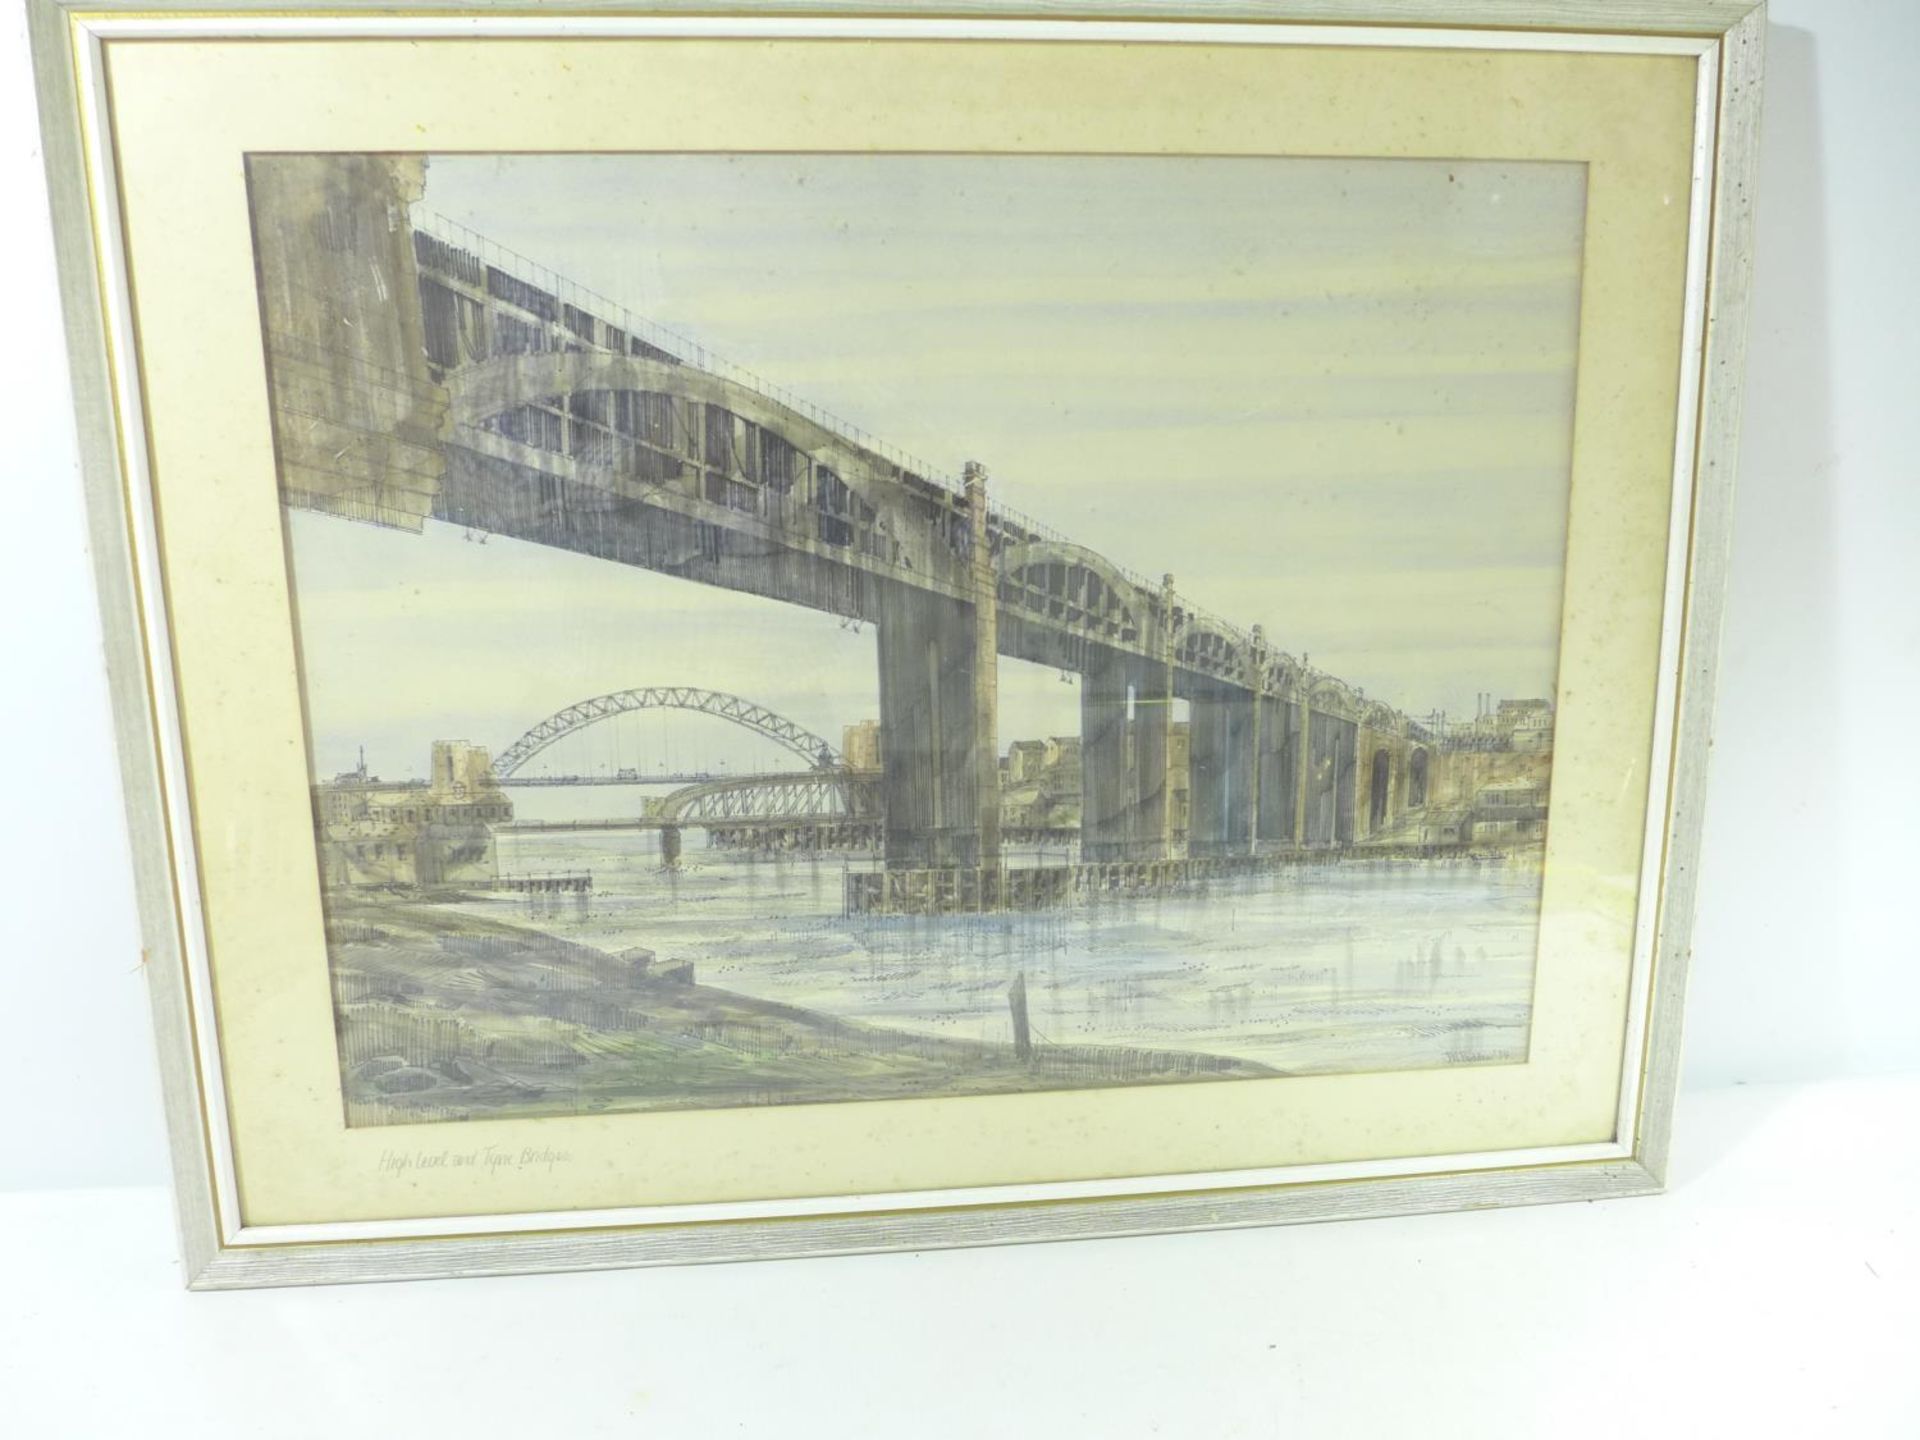 J.N.PADDEN (BRITISH 20TH CENTURY) 'HIGH LEVEL AND TYNE BRIDGE', HIGHLY DETAILED PEN AND INK AND